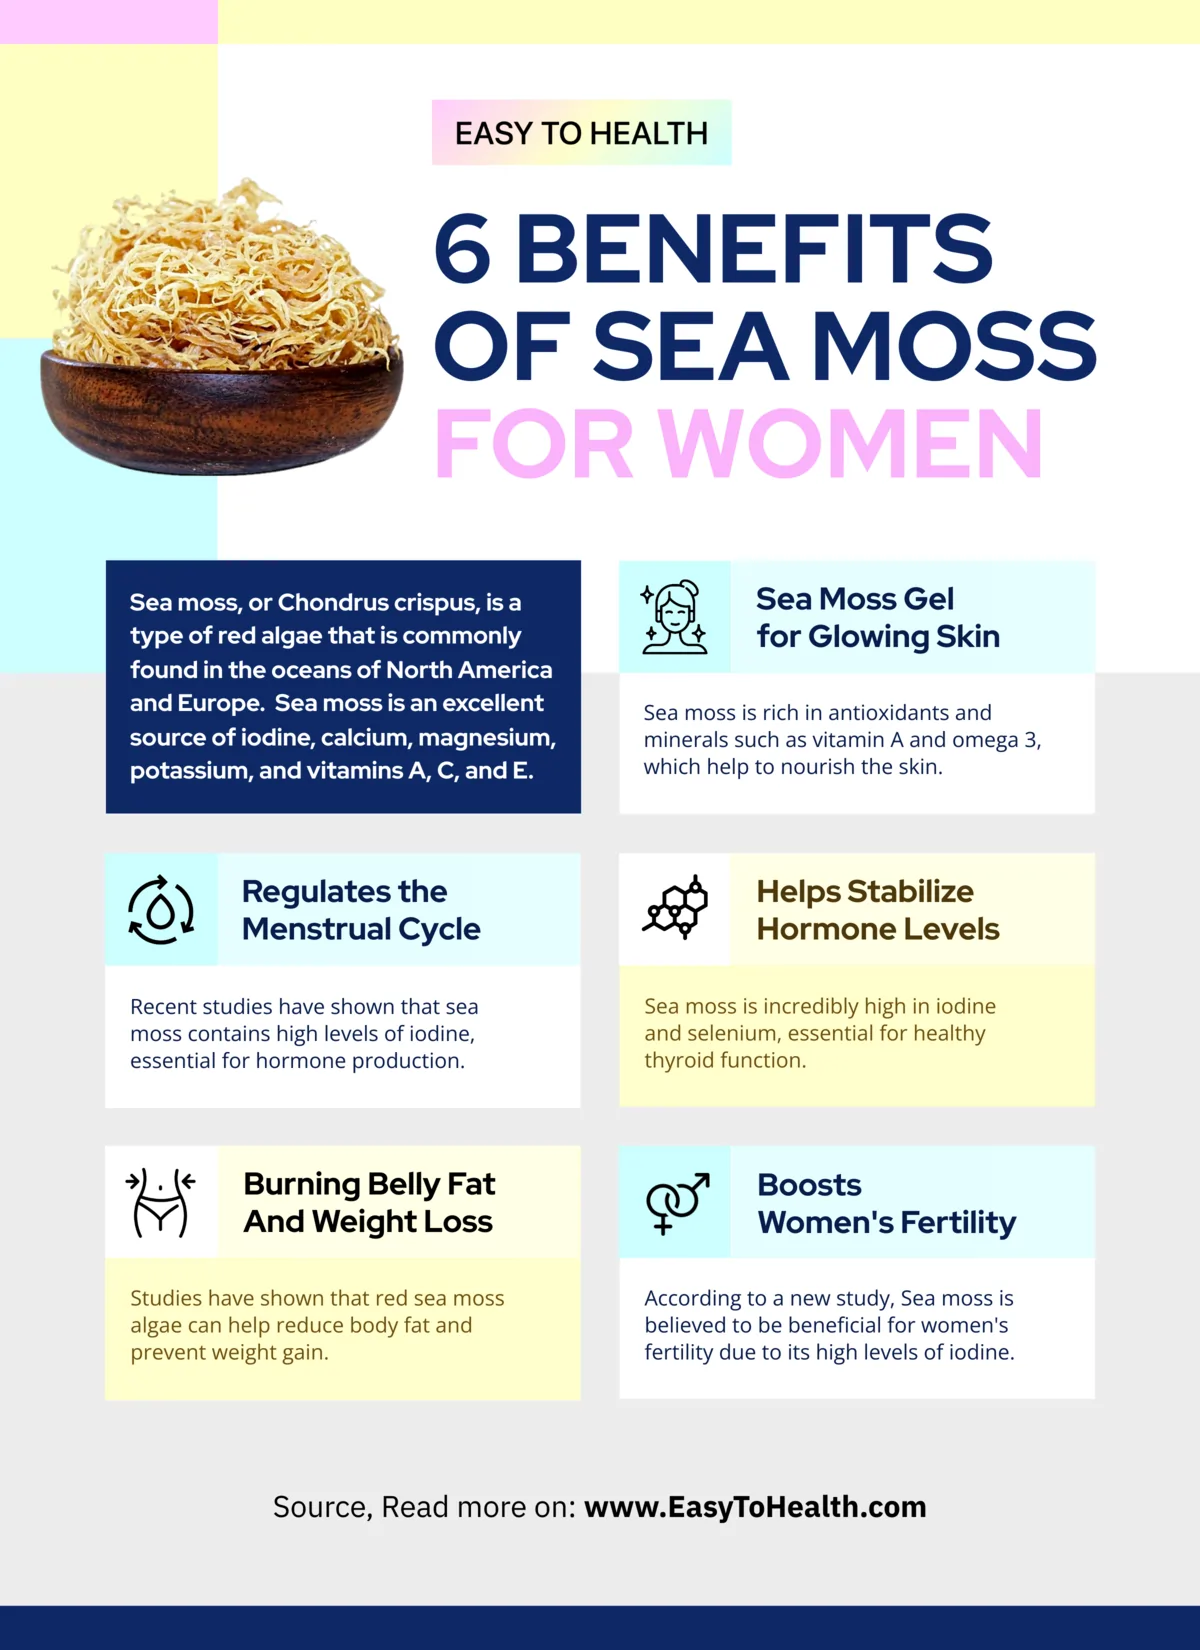 Sea Moss For Women Infographic